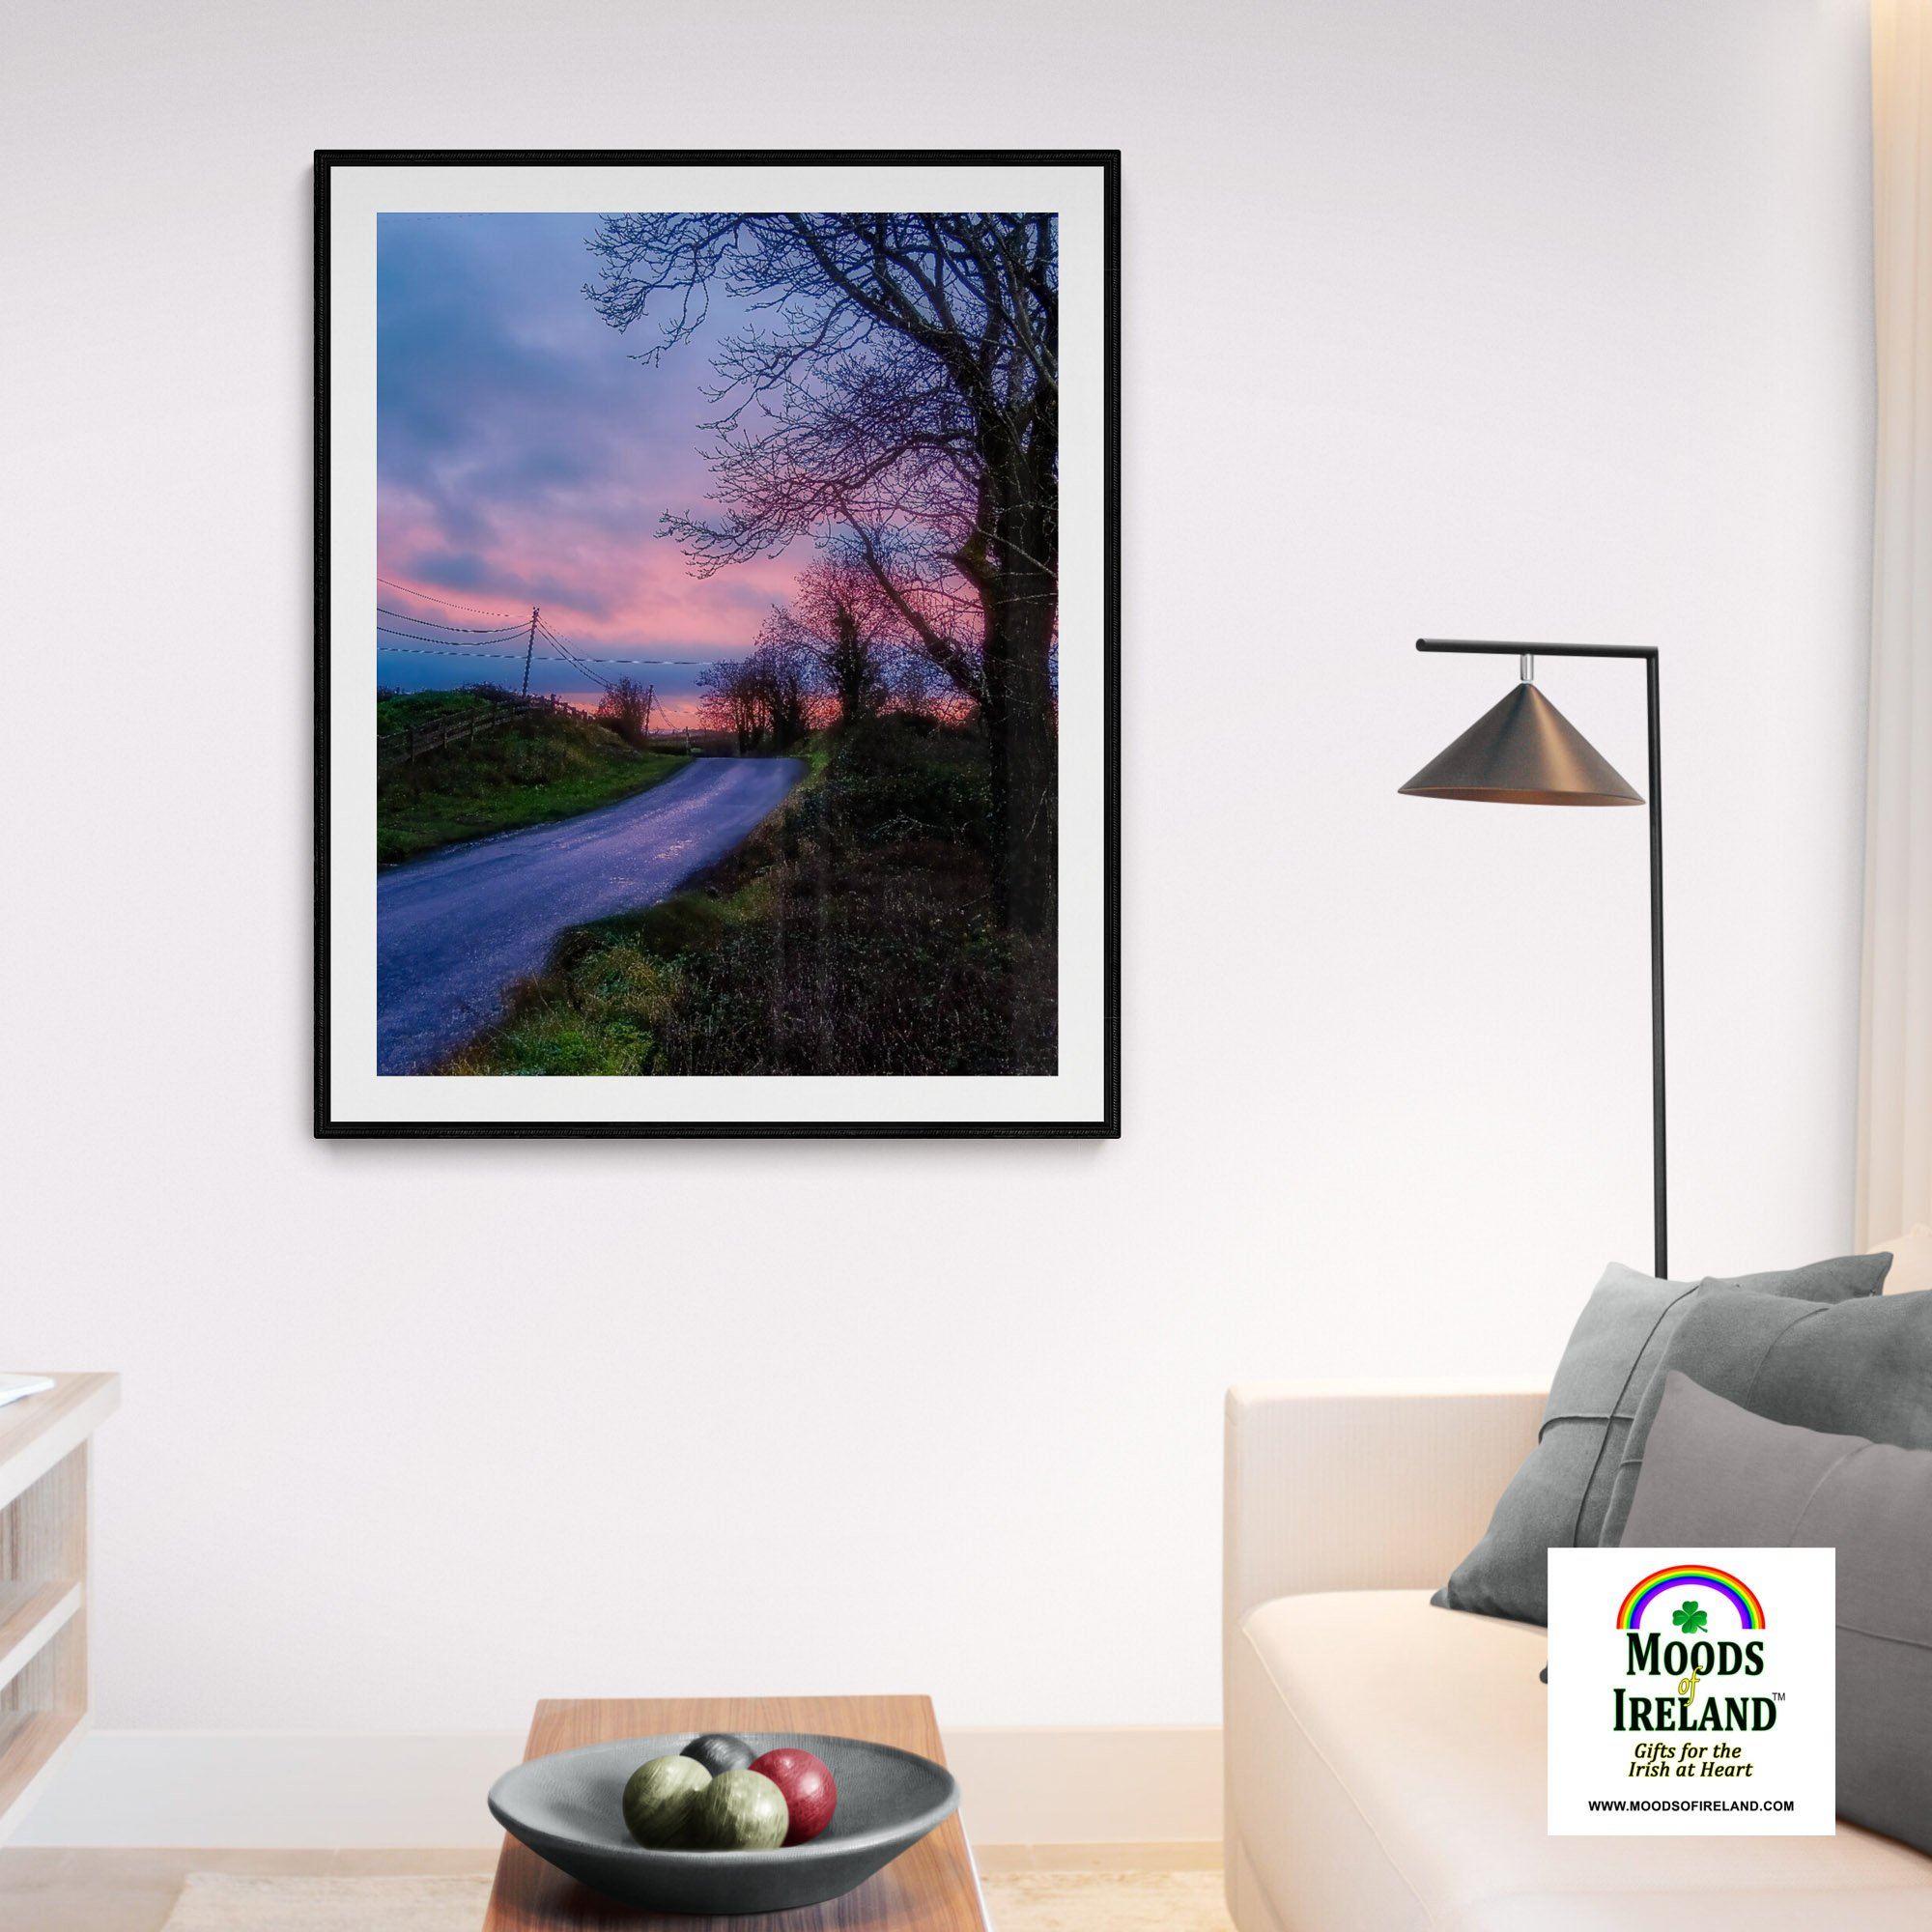 Print - Soothing Pink Sunrise over County Clare Country Road - James A. Truett - Moods of Ireland - Irish Art